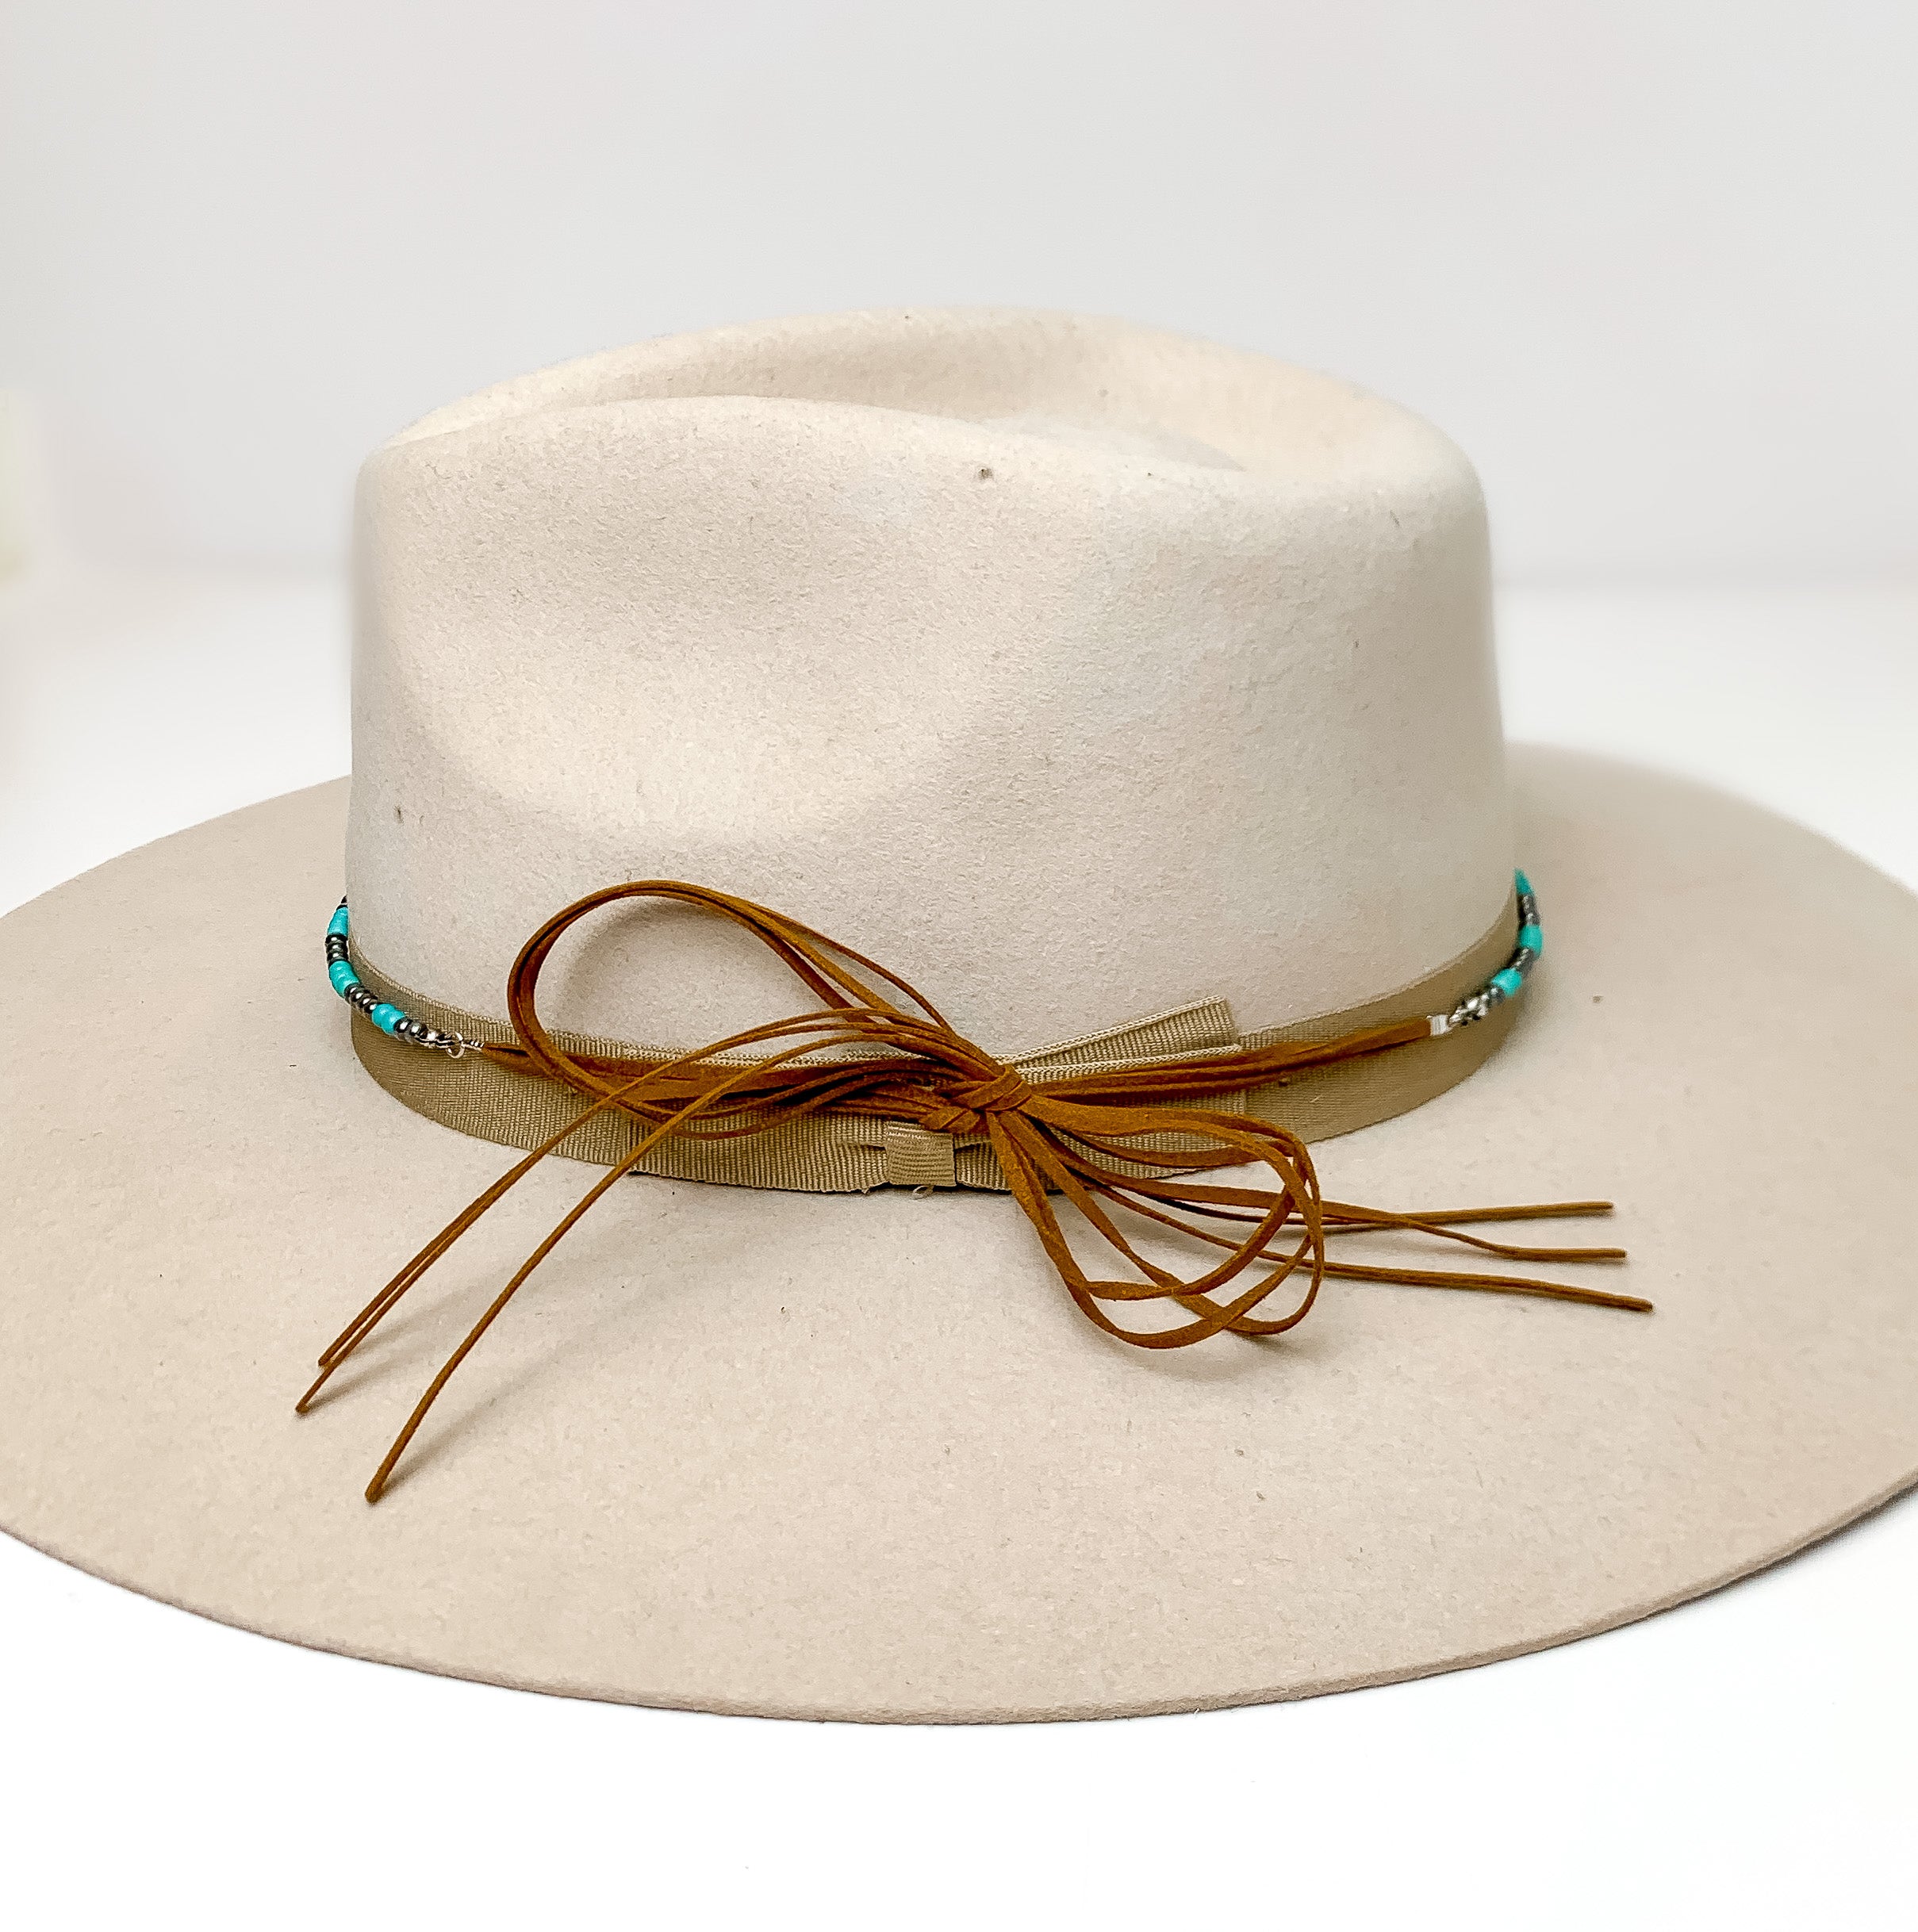 Silver Tone and Turquoise Pearl Hat Band With Howdy Charm and Brown Tie Strings - Giddy Up Glamour Boutique